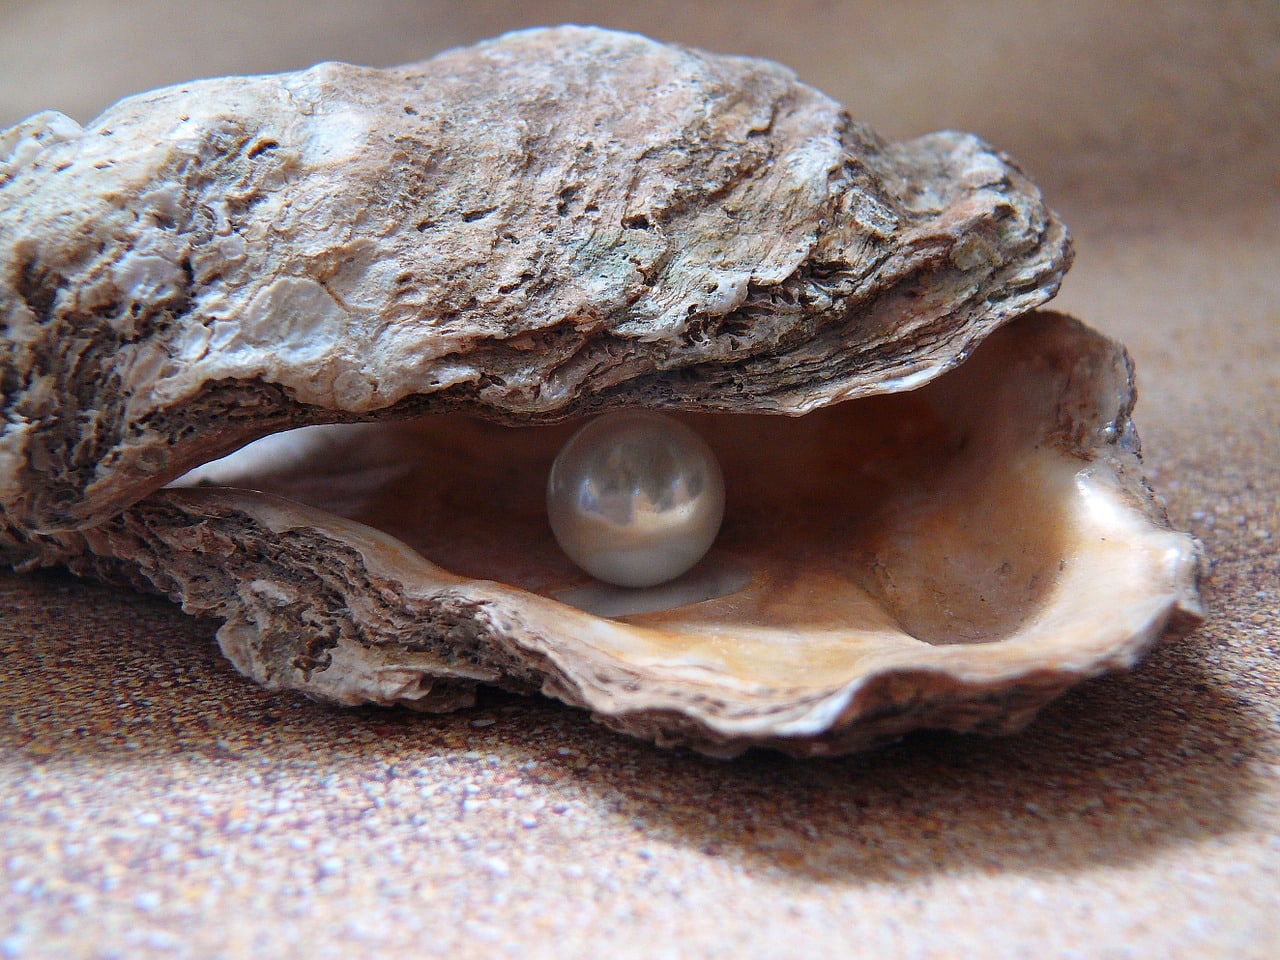 Pearl formed in oyster